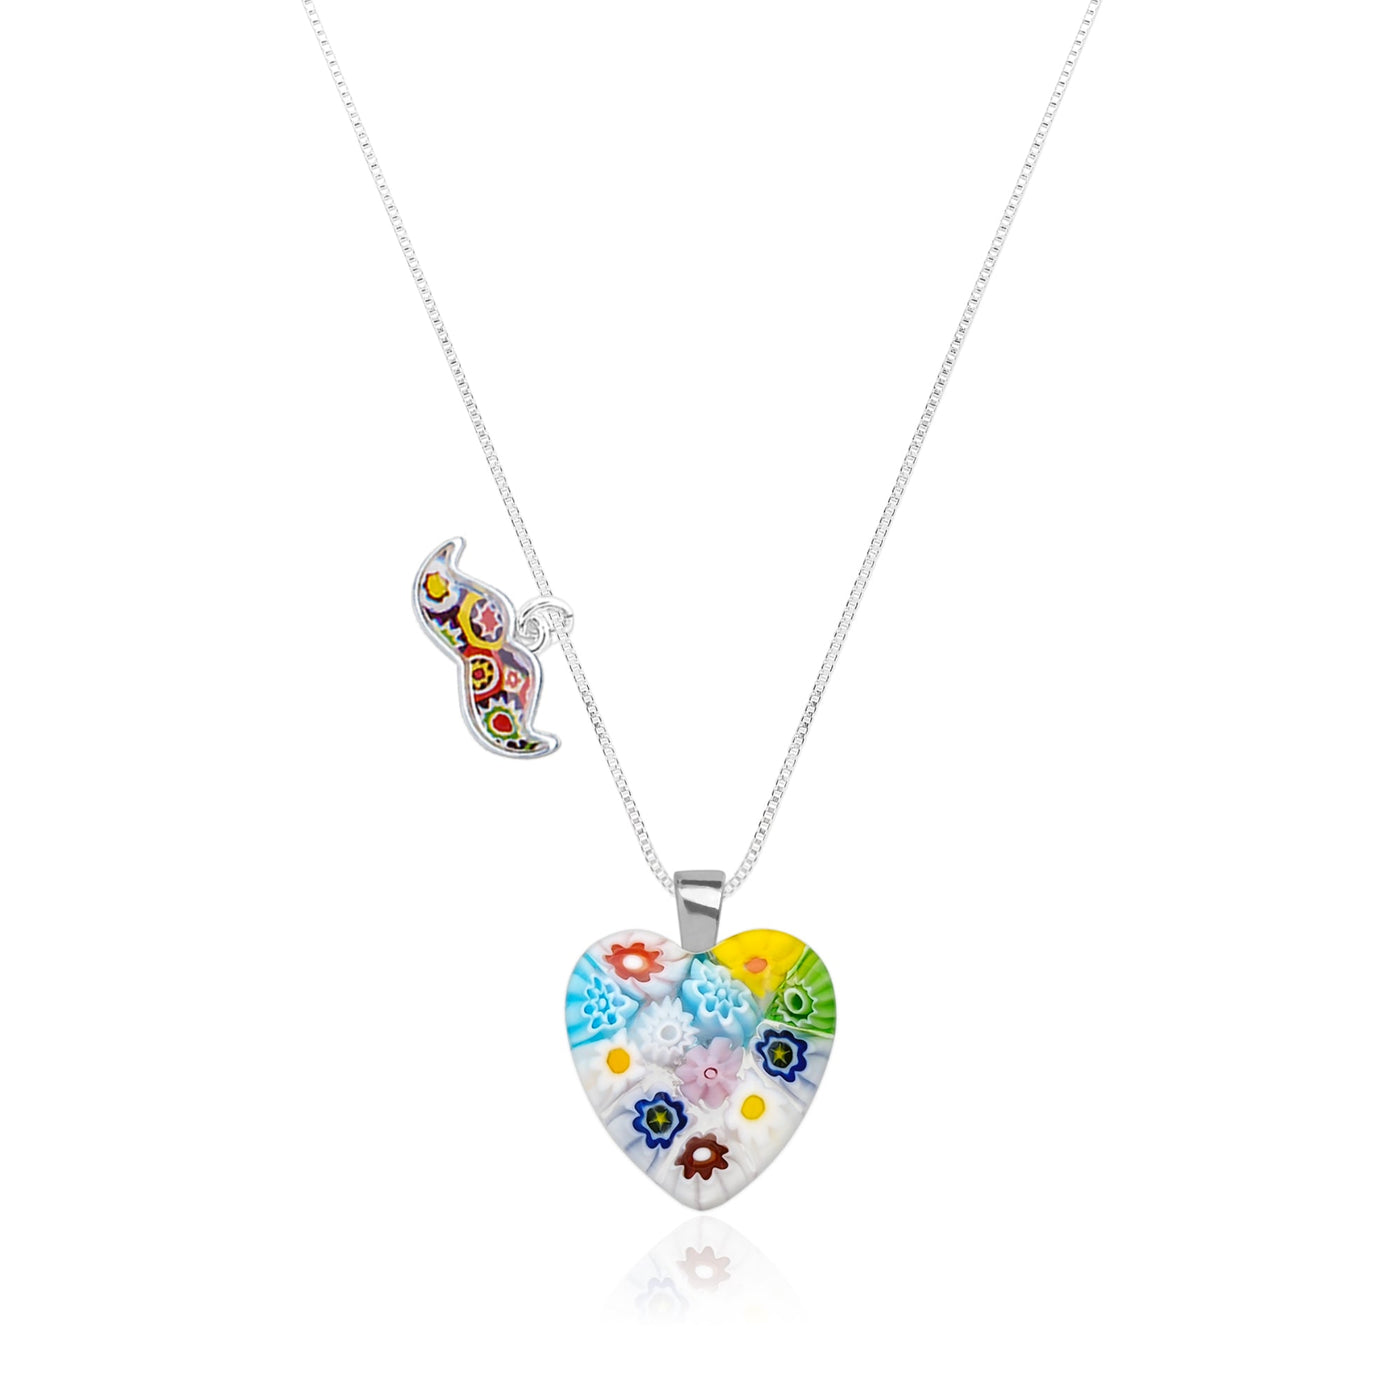 Flowers in Bloom Heart Necklace - 1mm 925 Sterling Silver [Free upgrade] - Pendant Necklace